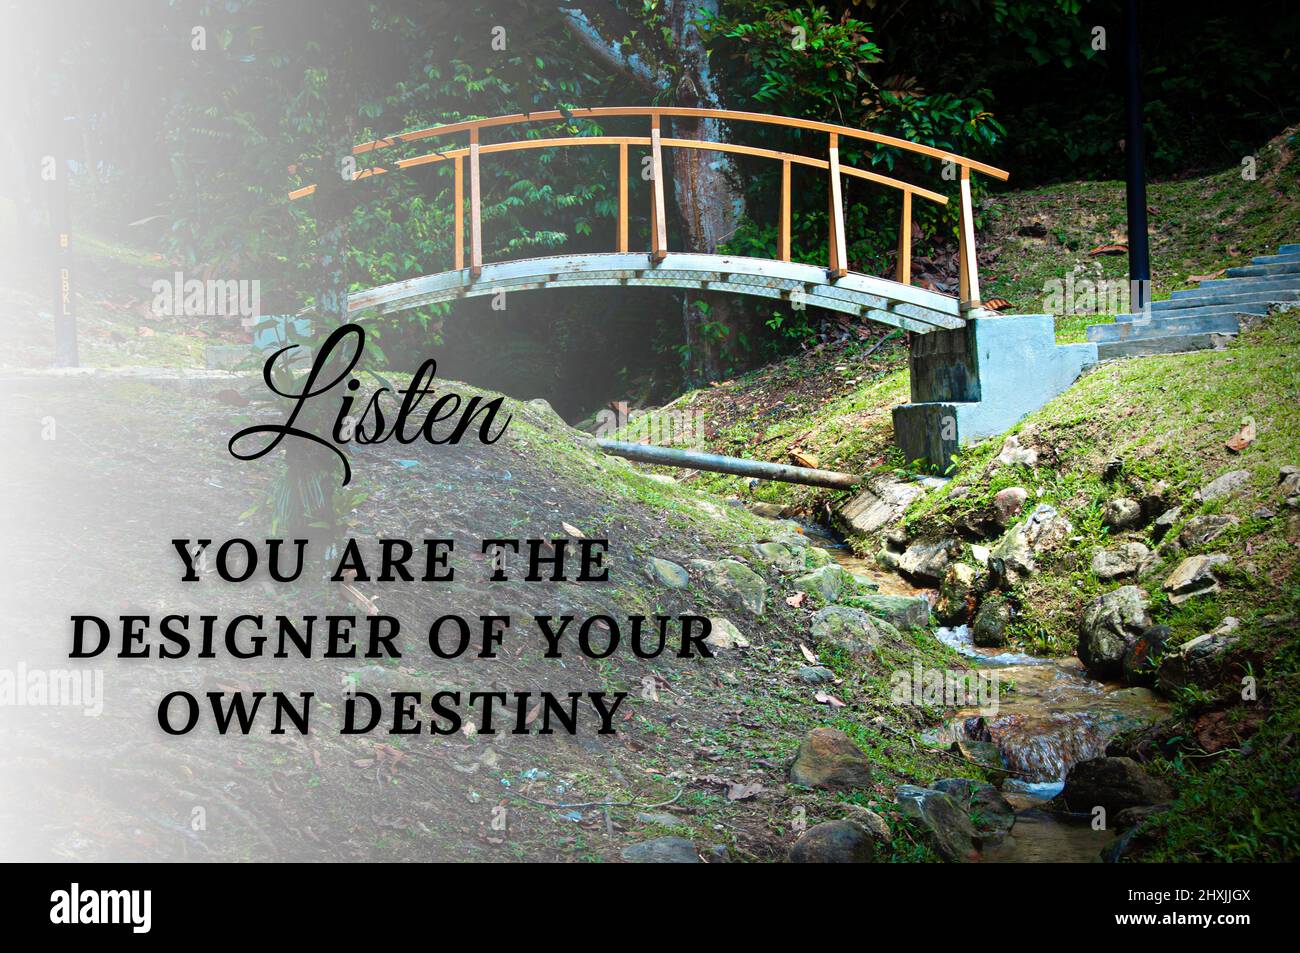 Motivational quote - You are the designer of your own destiny. Waterfall and bridge background. Motivatonal concept Stock Photo